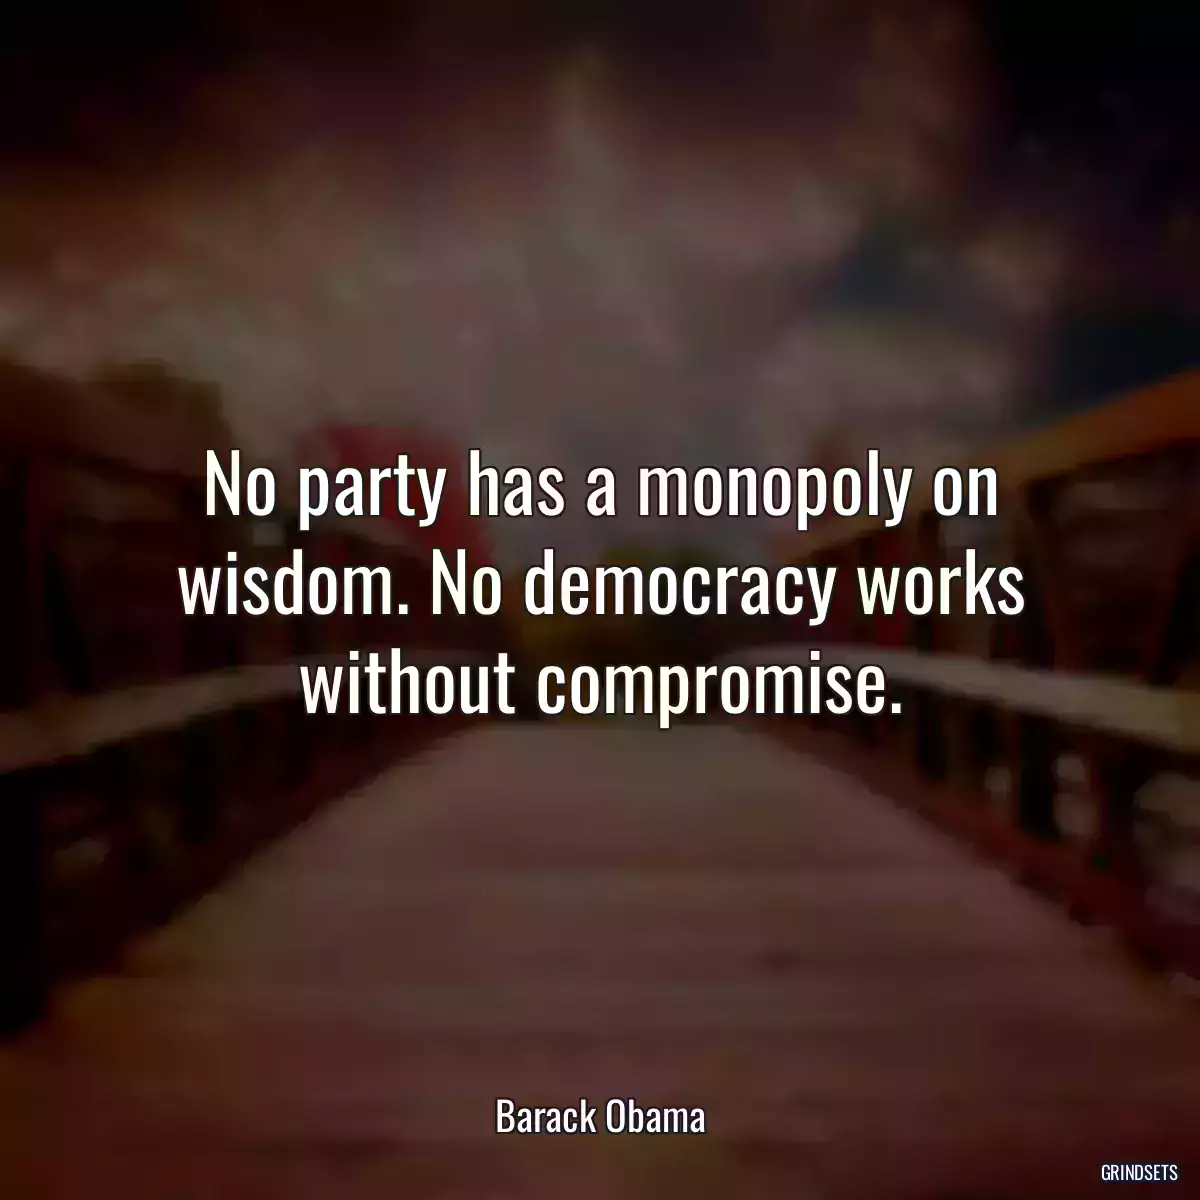 No party has a monopoly on wisdom. No democracy works without compromise.